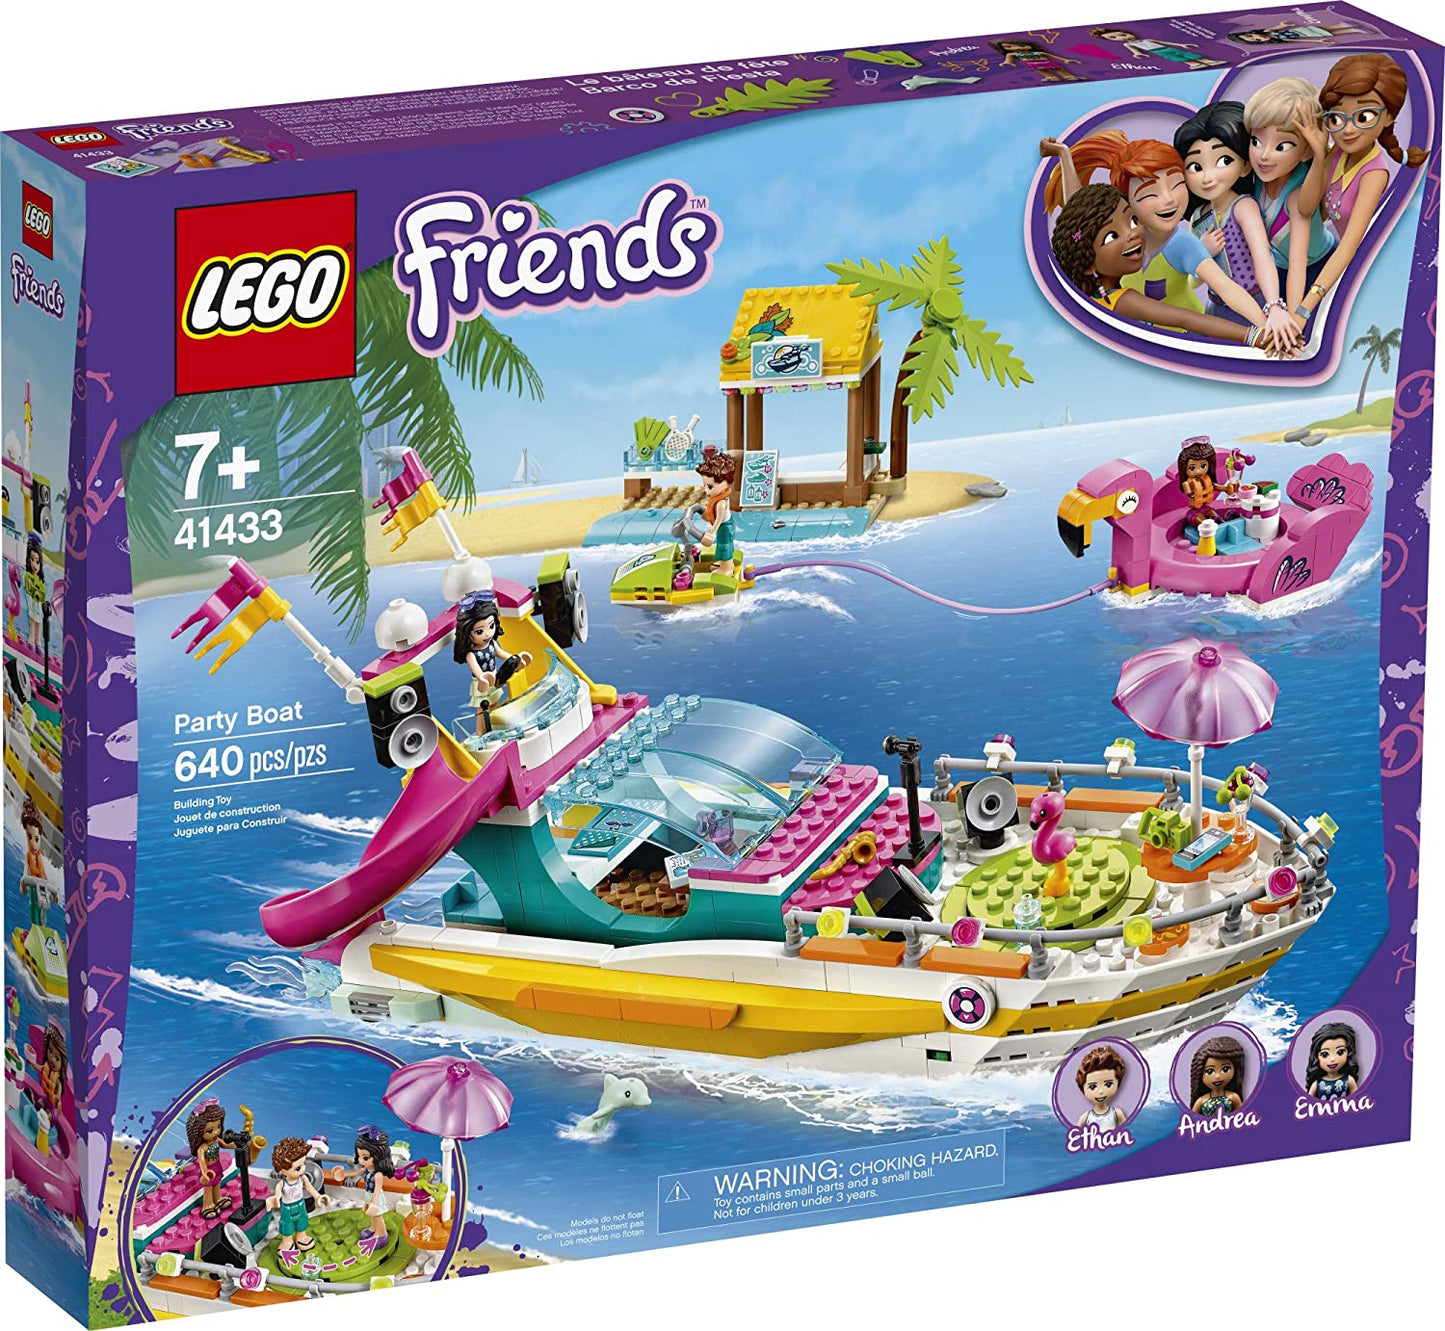 LEGO Friends - Party Boat 41433